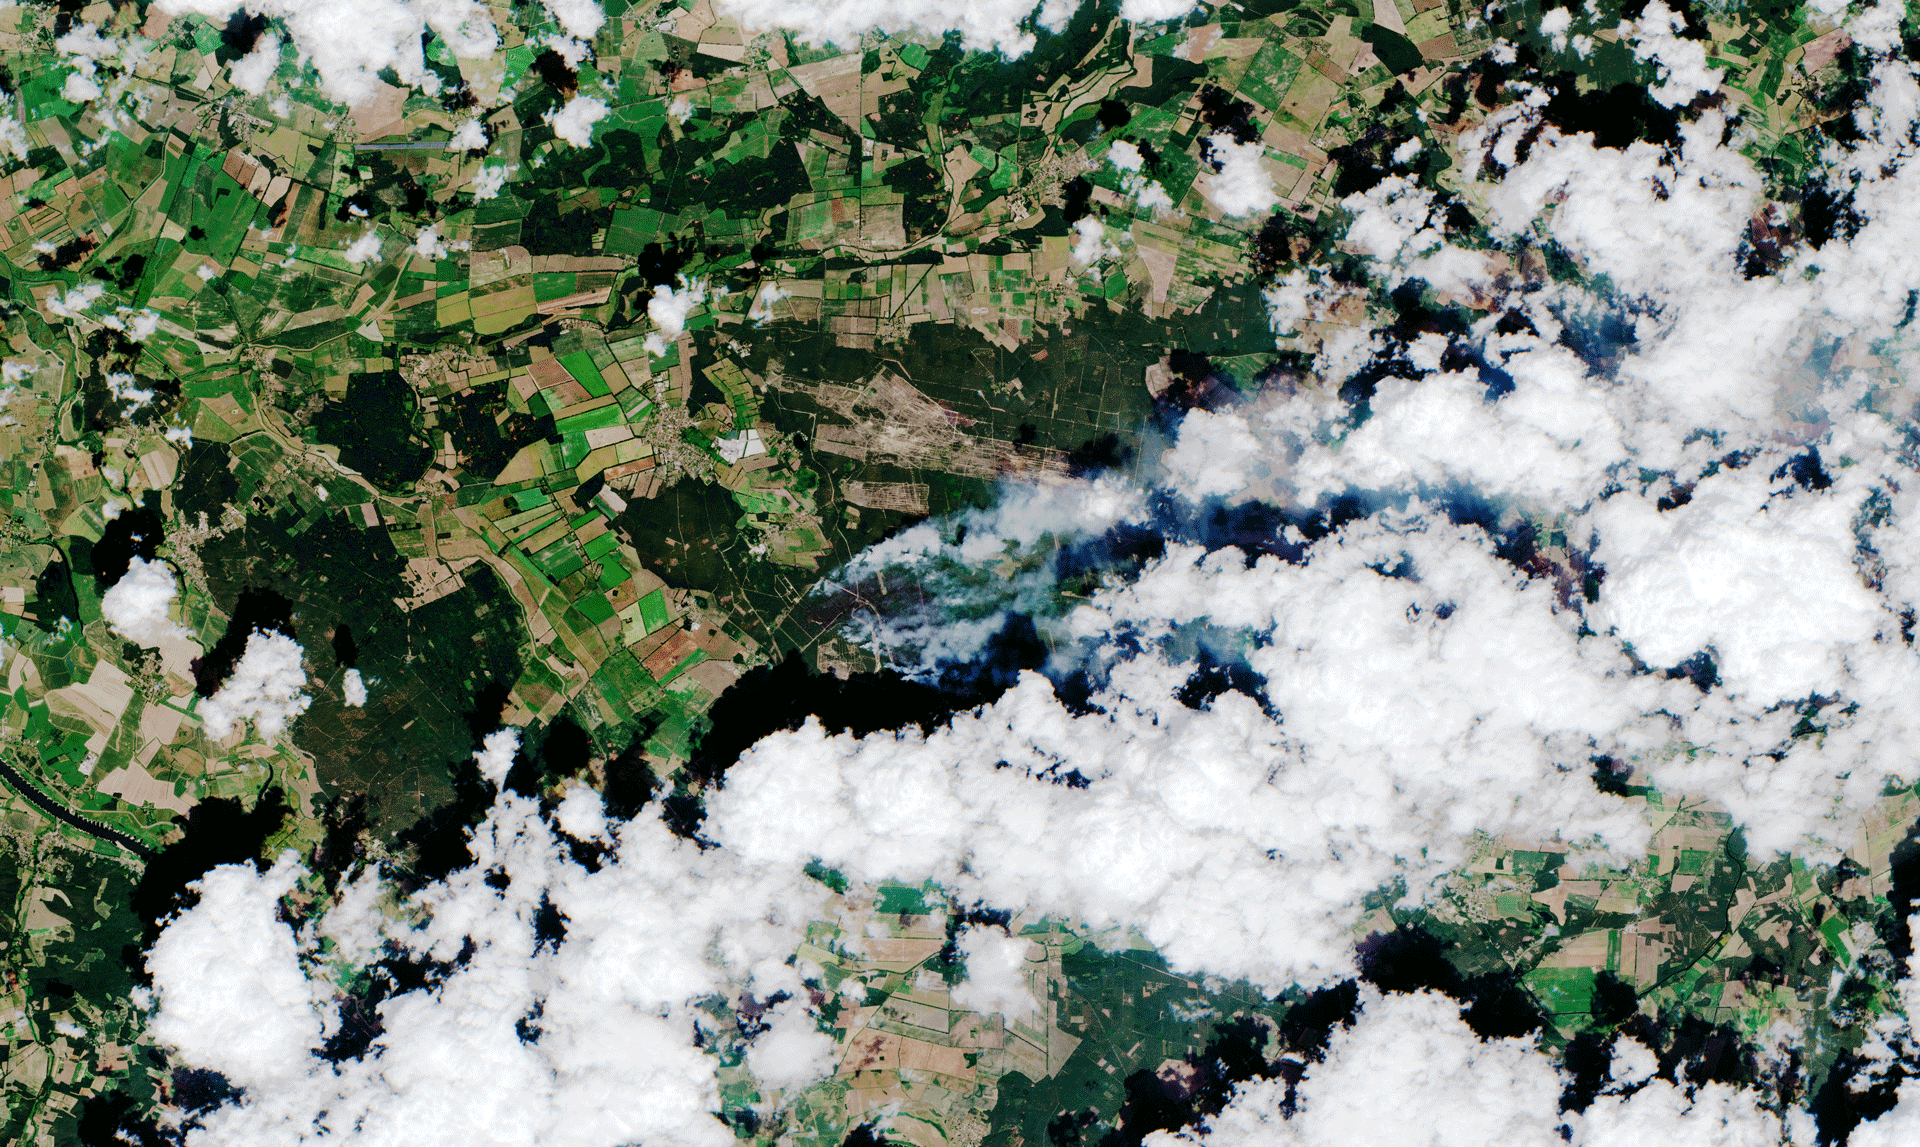 Figure 23: This animation was captured by the Copernicus Sentinel-2 mission, with a resolution of up to 10 m, on 1 July at 10:20 GMT (12:20 CEST). The true-color image shows the smoke emerging from the training site, while the other image was processed using the shortwave infrared which allows for a better view of the blaze under the smoke – which can be seen in bright orange (image credit: ESA, the image contains modified Copernicus Sentinel data (2019), processed by ESA, CC BY-SA 3.0 IGO)